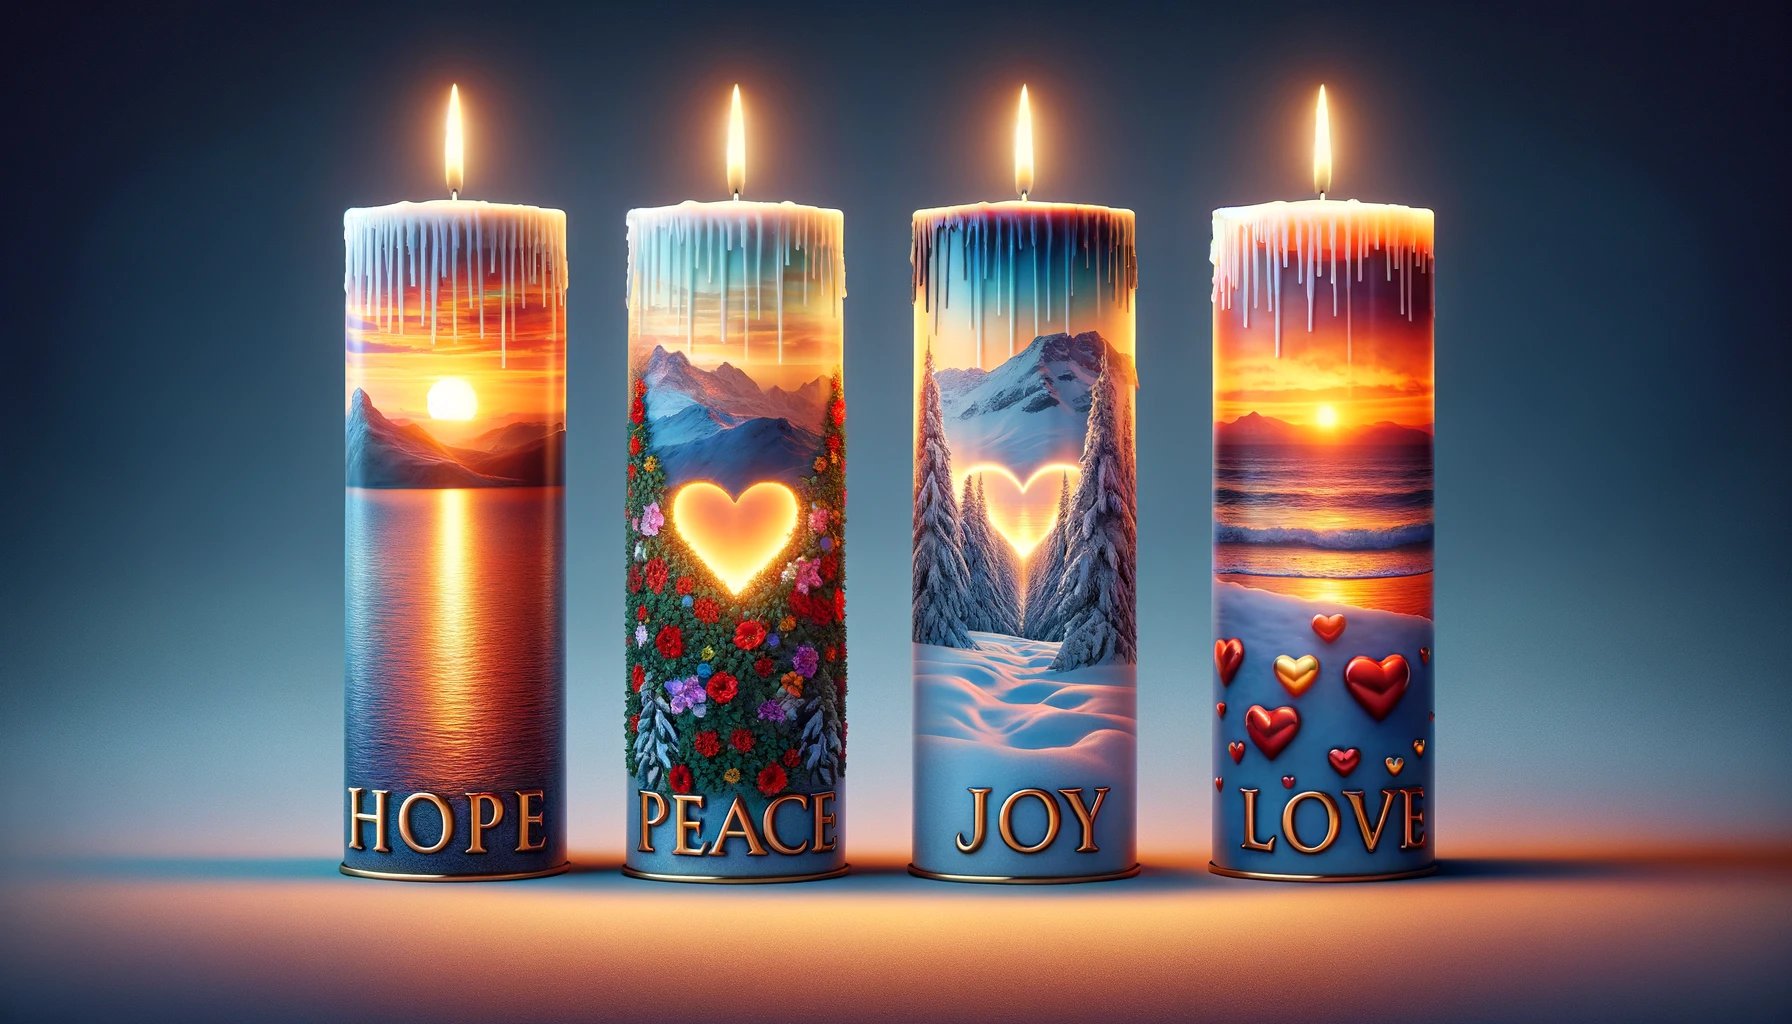 What Does Each Candle Mean For Advent